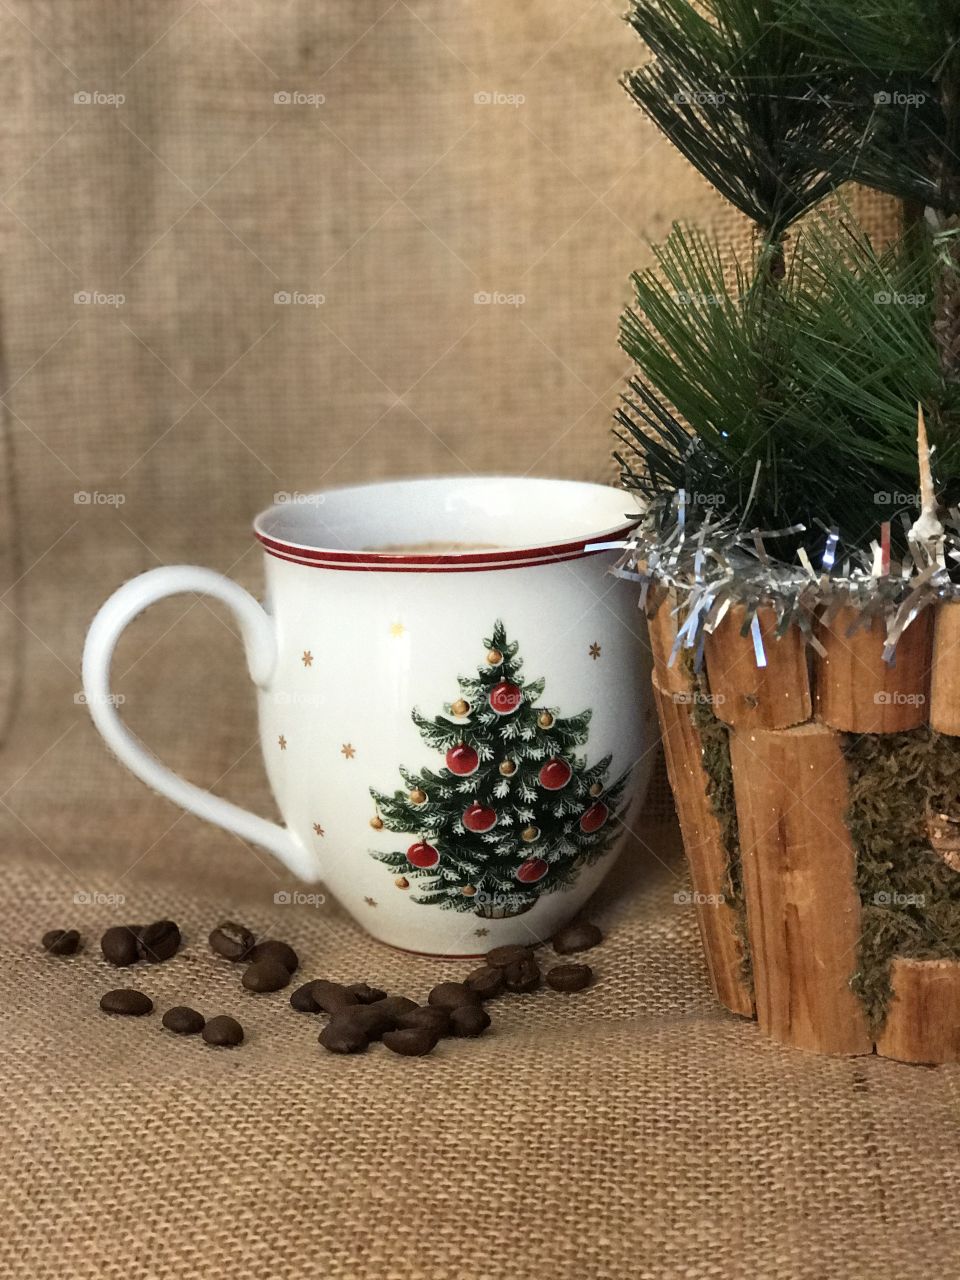 Coffee cup and Christmas decor on sackcloth background.